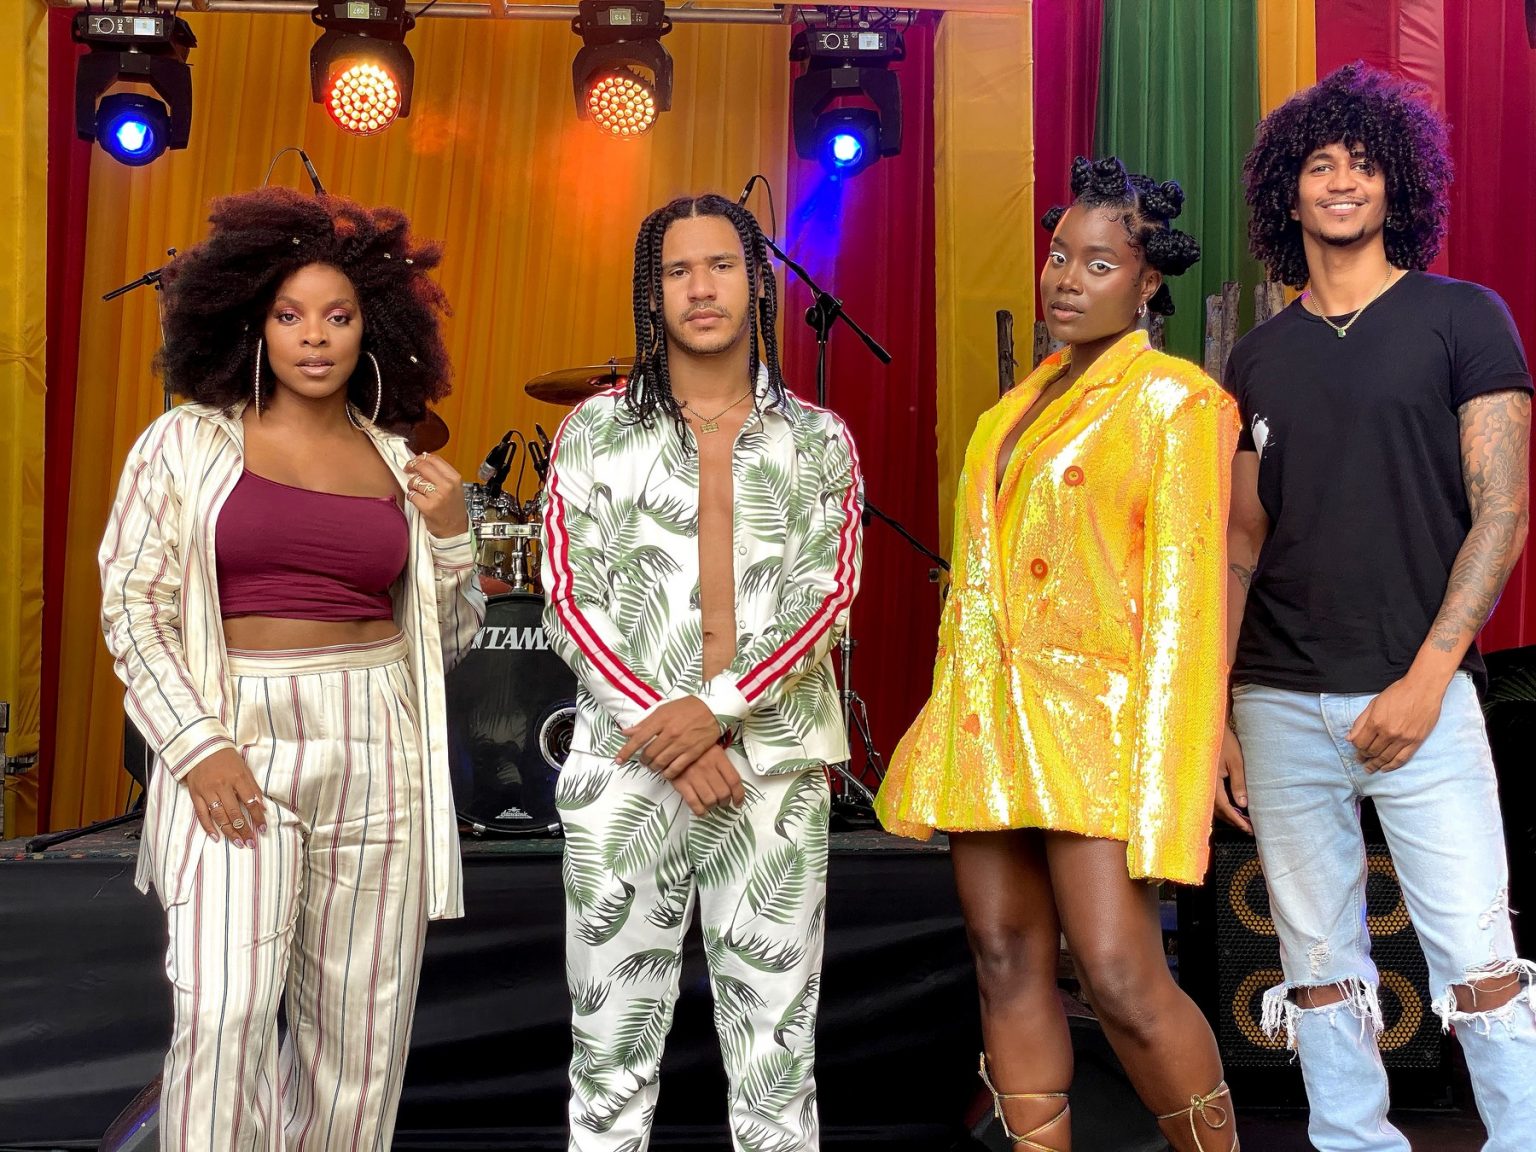 MusicTT to take Caribbean music to SXSW with ‘The Island Stage’